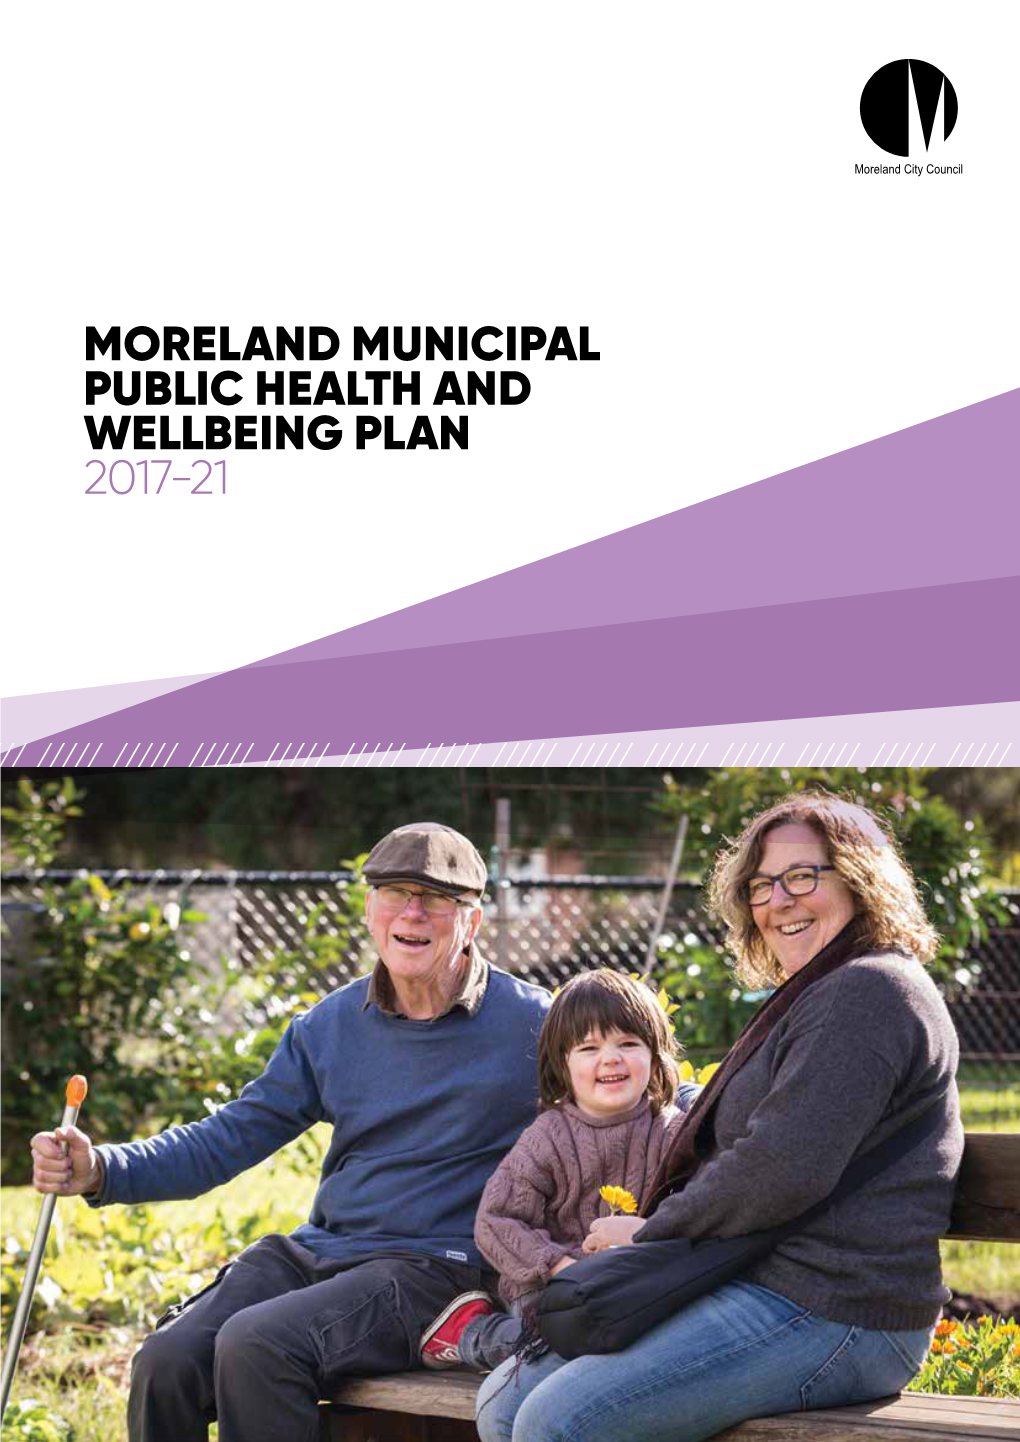 Municipal Public Health and Wellbeing Plan 2017-21